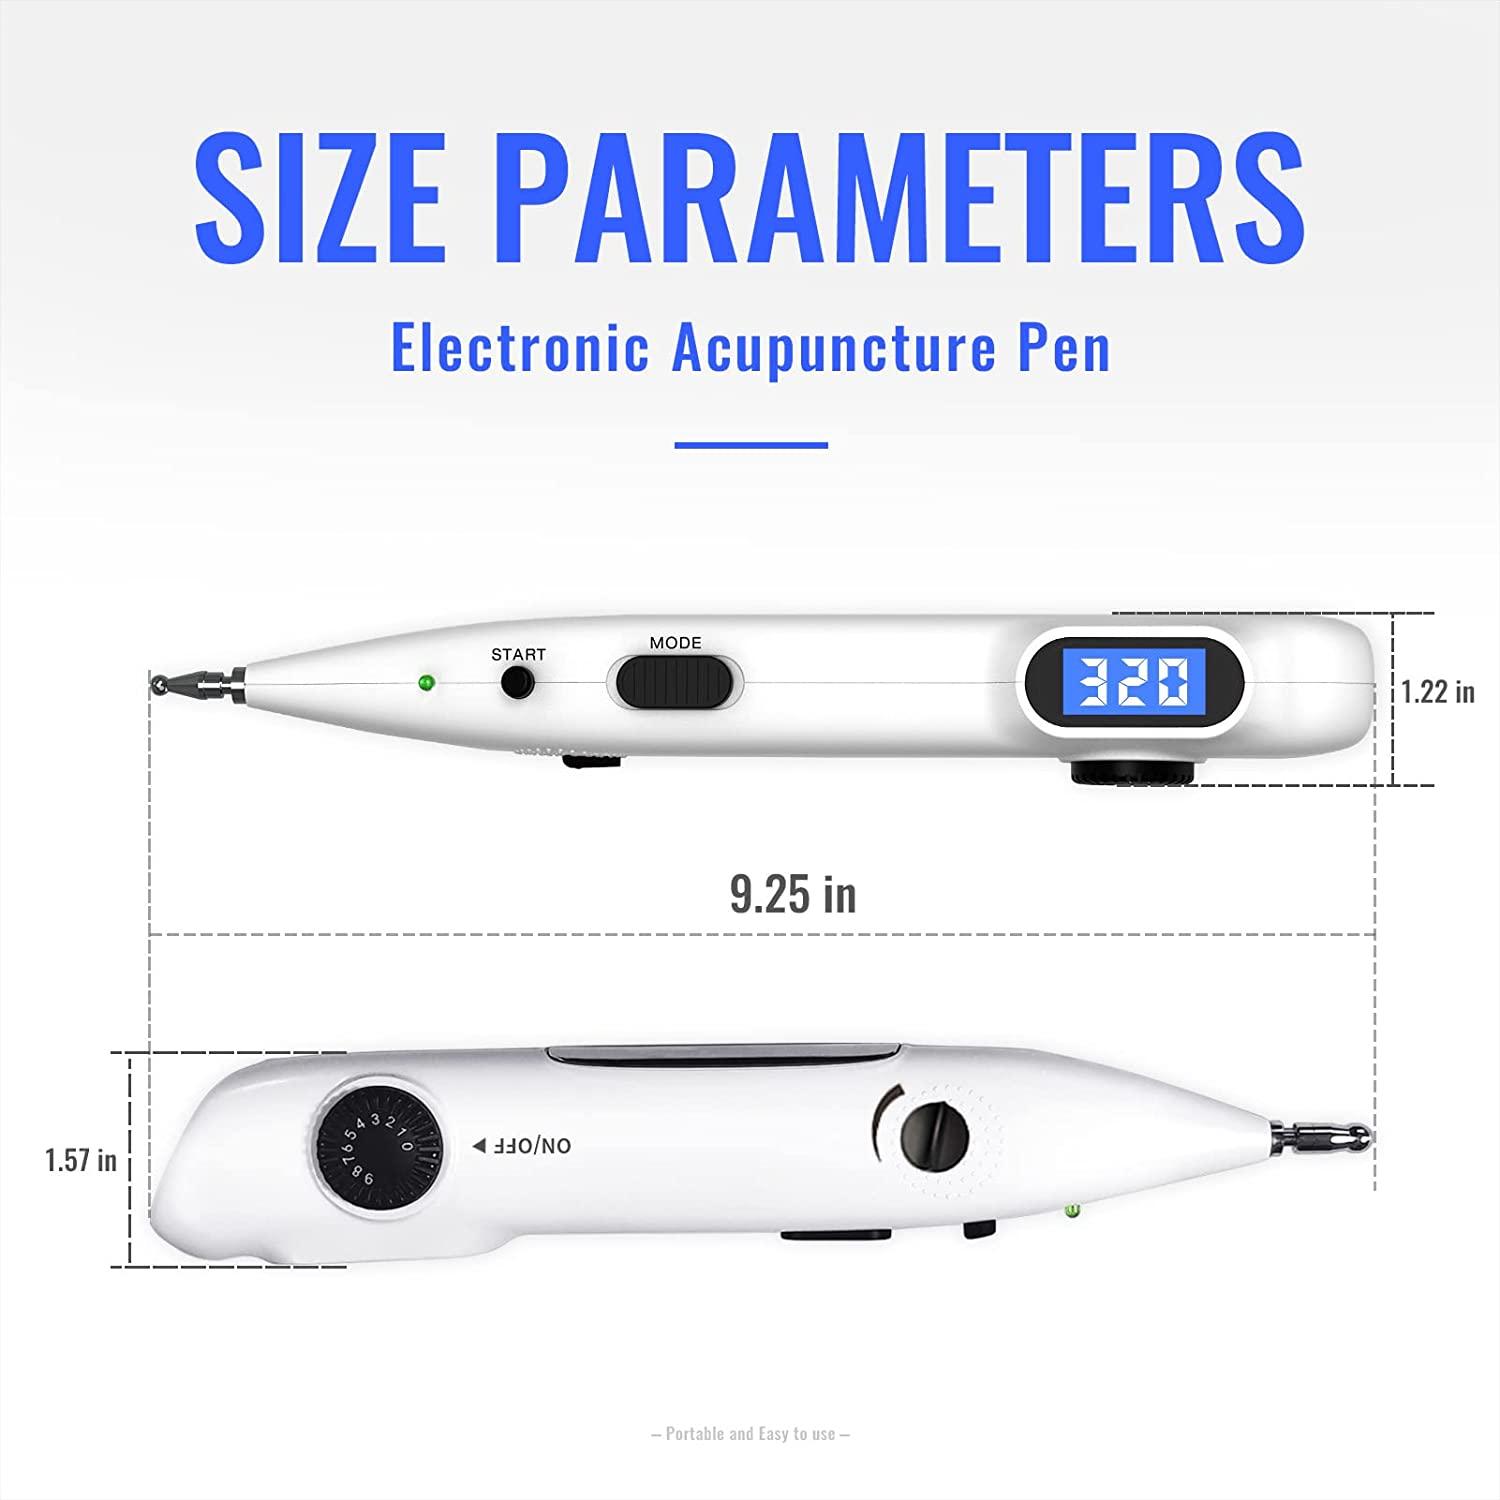 Leawell Acupuncture Pen for Pain Relief, Patented, Electric Acupuncture Therapy Pen 508B Rechargable| Beep Tells Meridian (Acupuncture Therapy Pen)